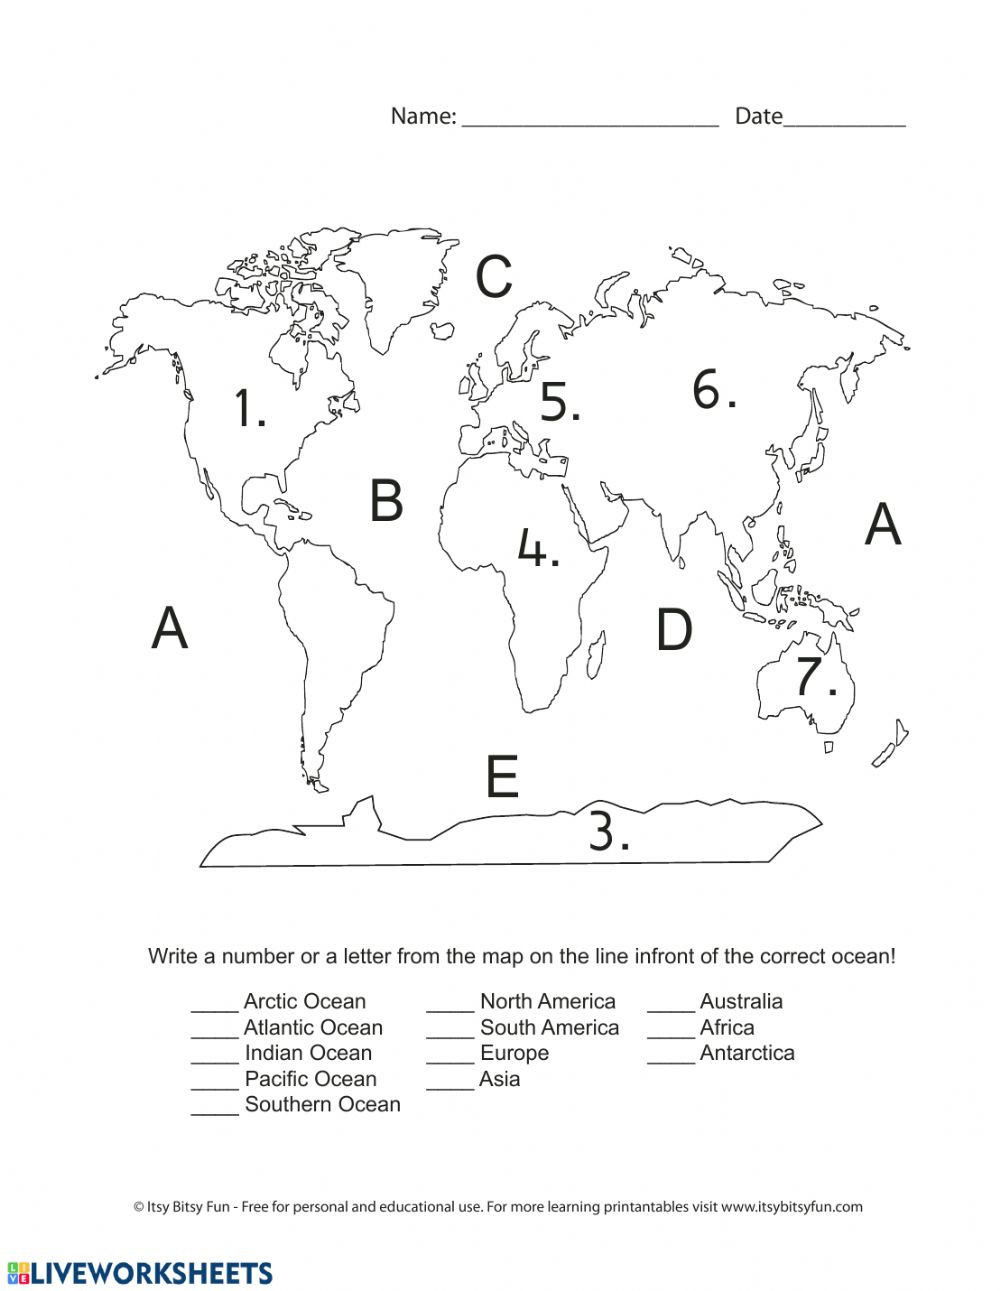 Continents and Oceans Worksheet Continents and Oceans Review Interactive Worksheet